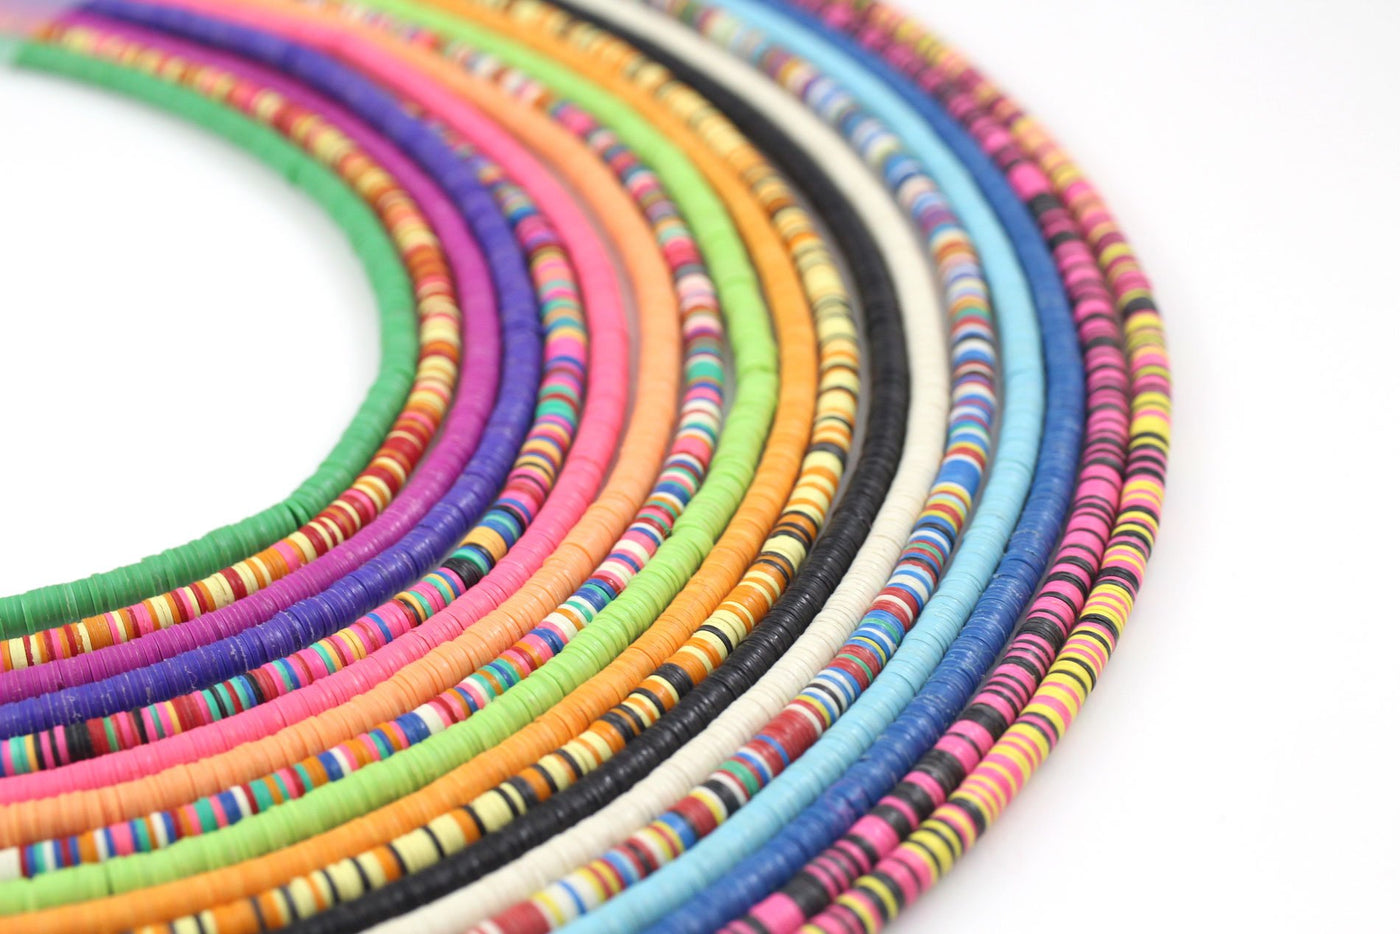 4mm Vinyl Record Beads: Ghanaian Heishi Disc Spacers, Tribal Jewelry Making Supplies from Africa